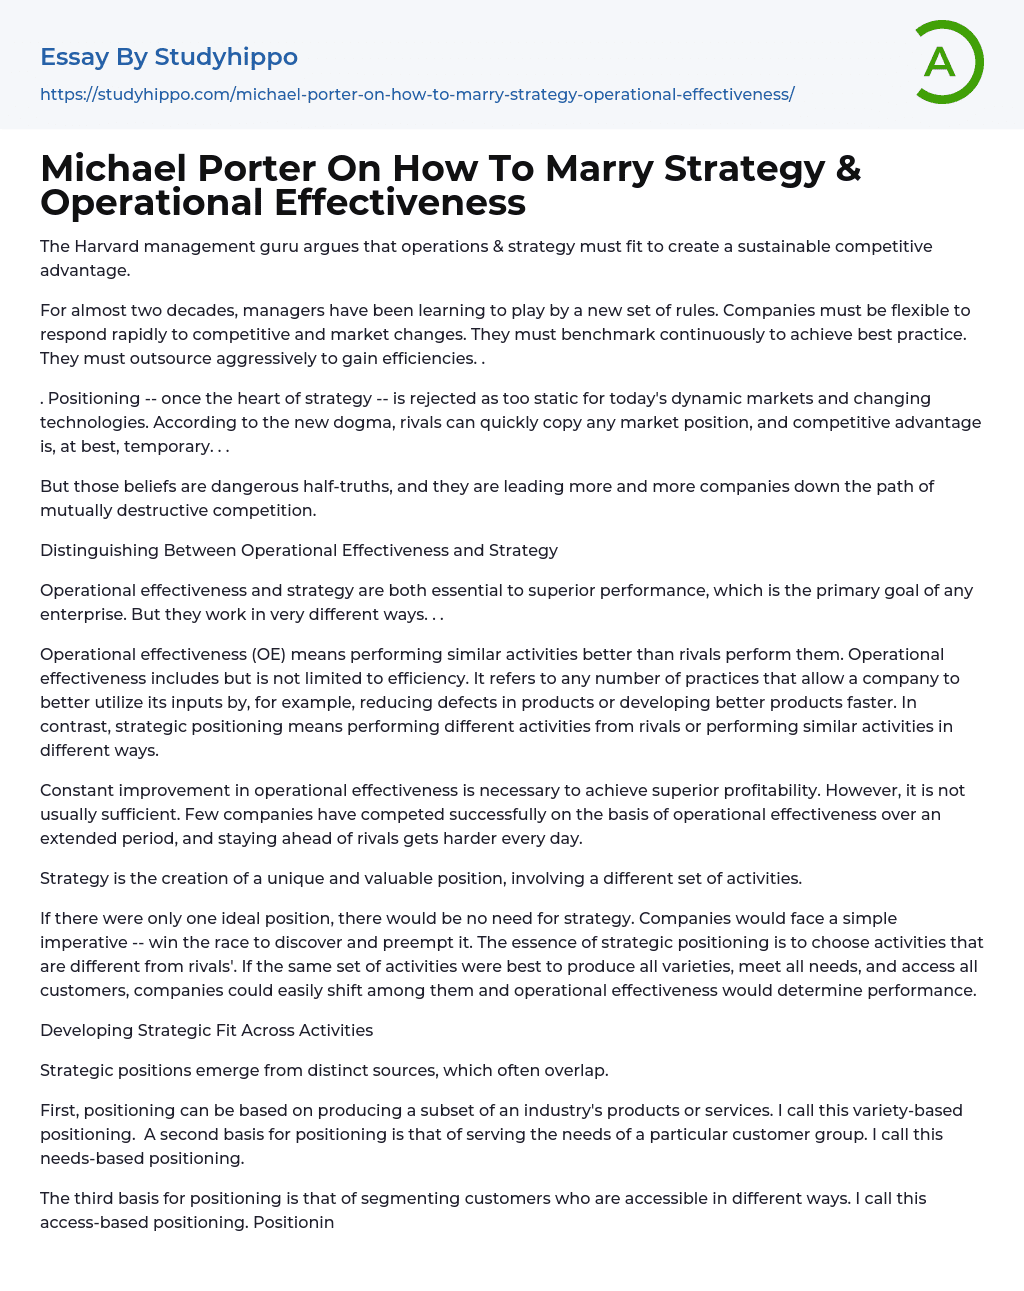 Michael Porter On How To Marry Strategy & Operational Effectiveness Essay Example